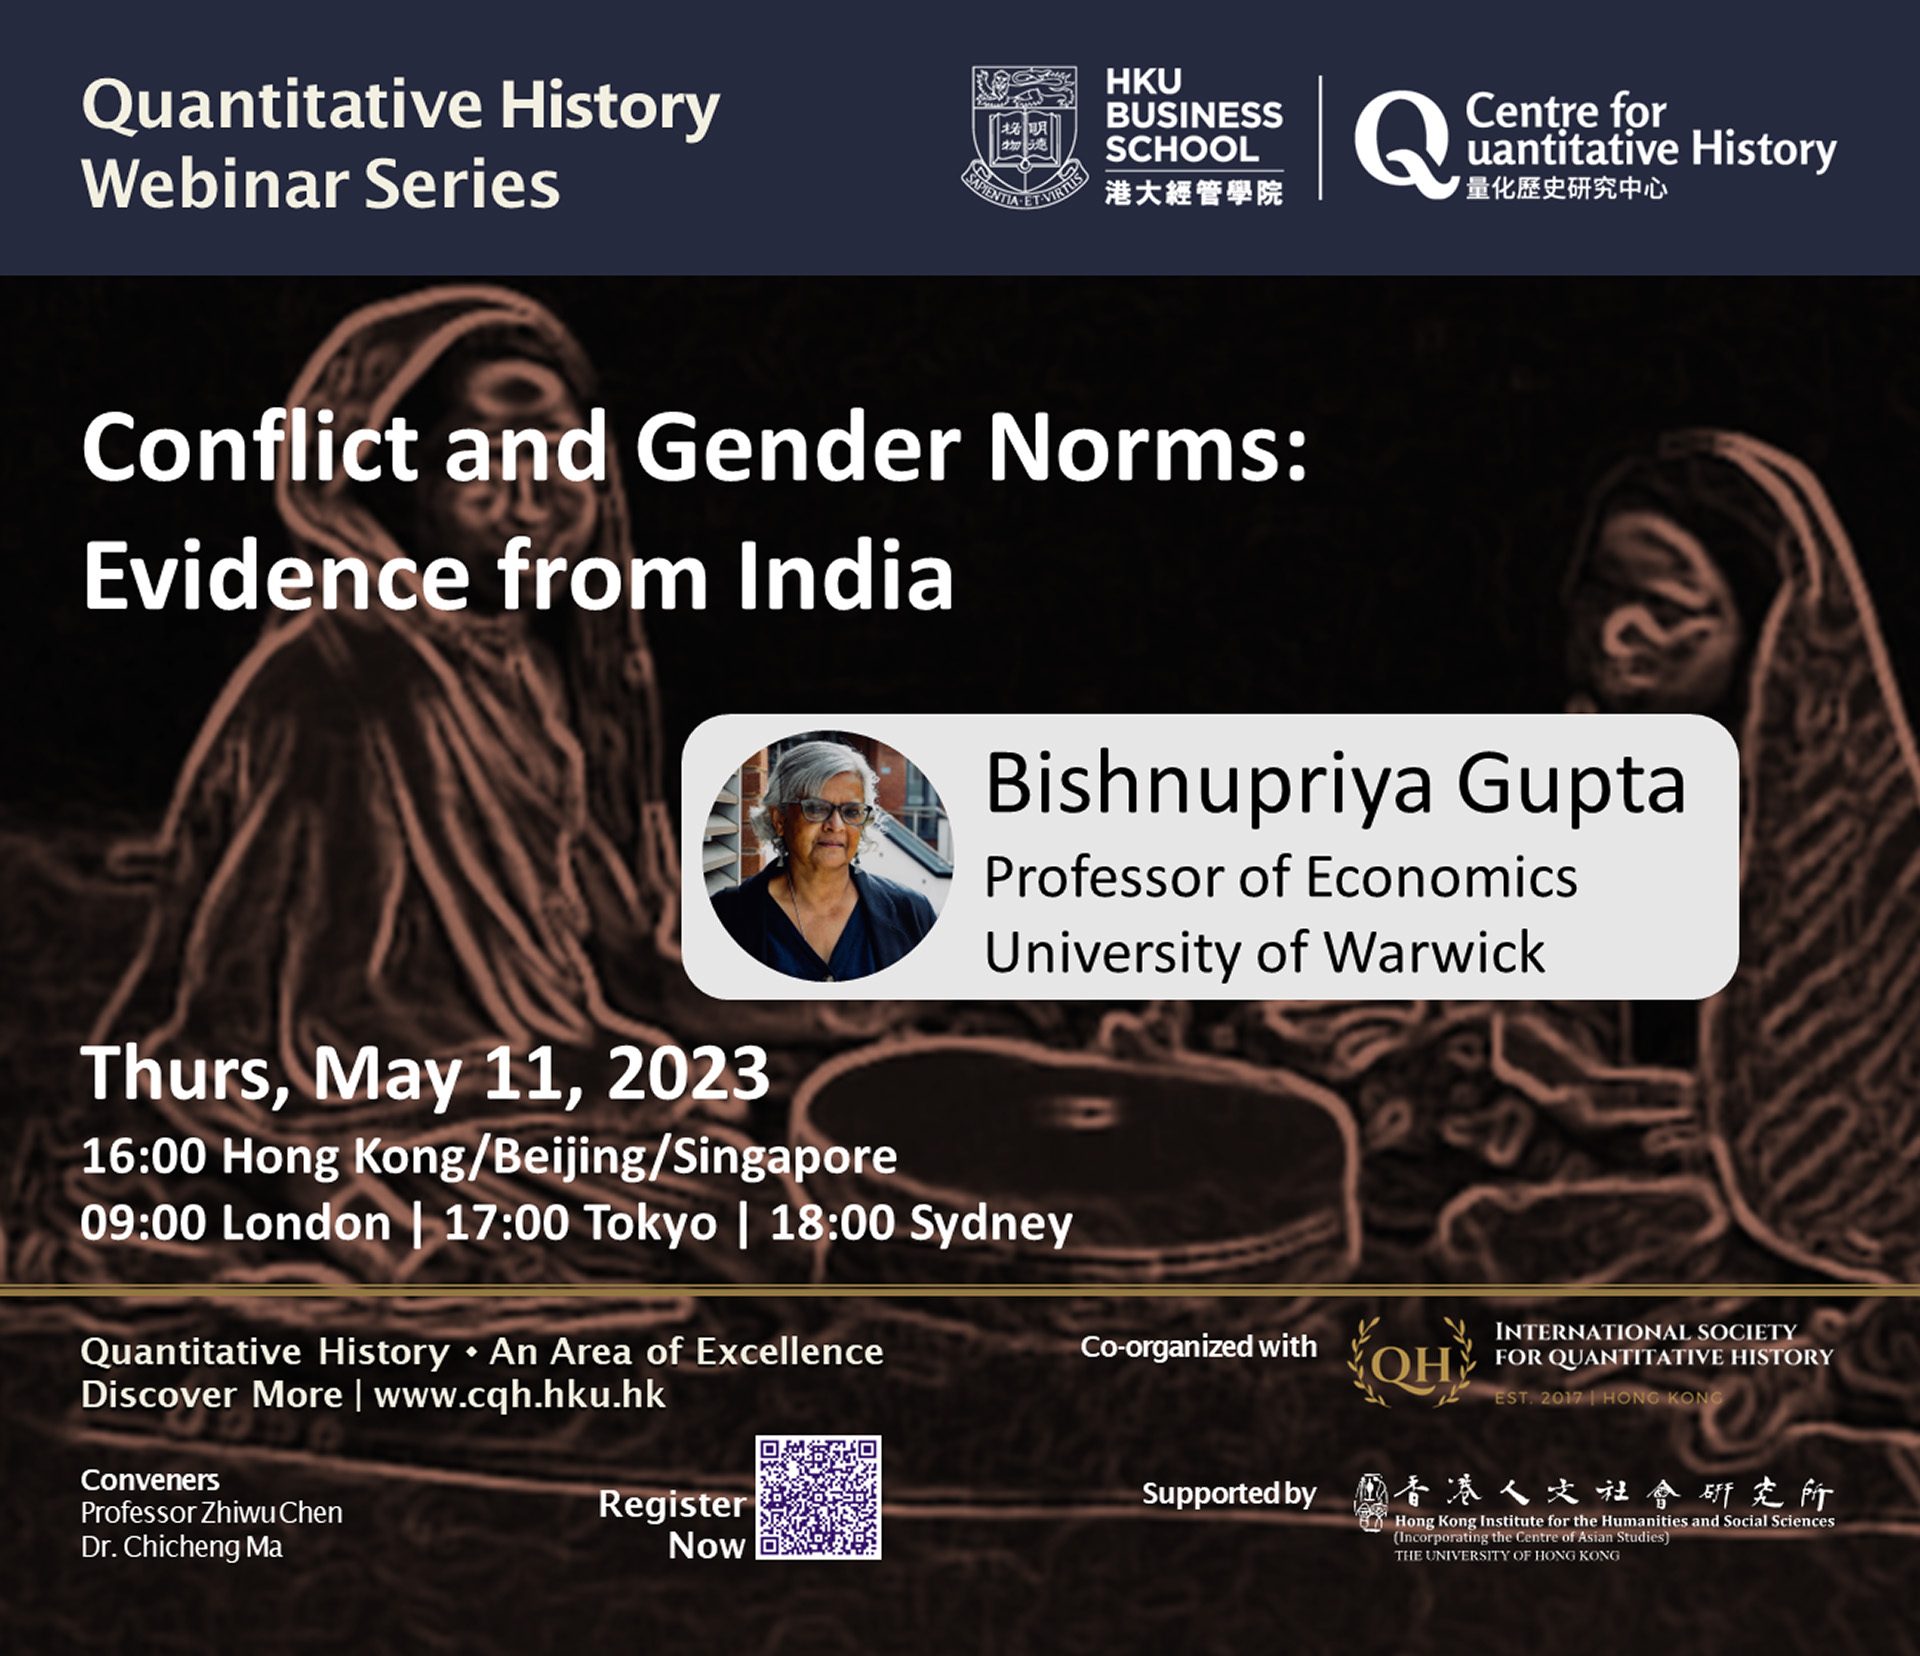 Quantitative History Webinar on “Conflict and Gender Norms: Evidence from India” by Professor Bishnupriya Gupta (May 11, 2023)